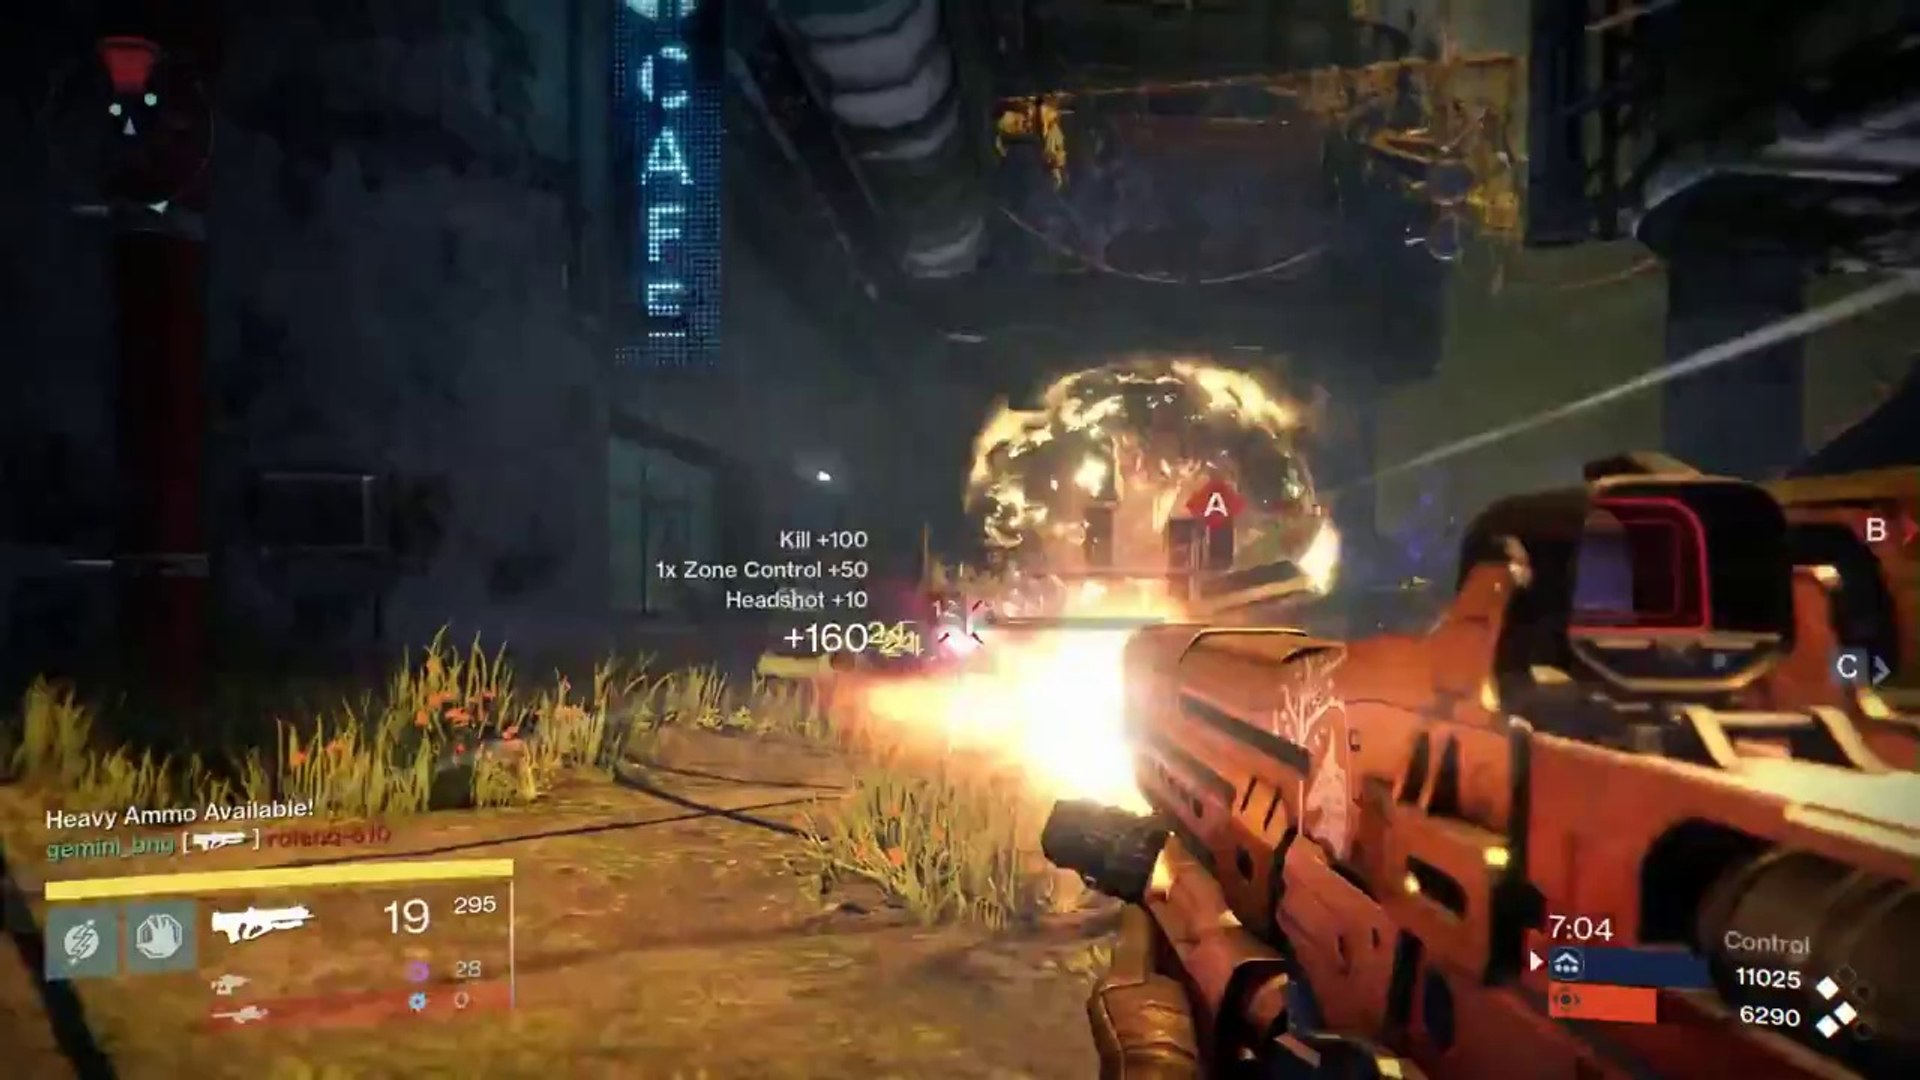 Nest Luxe extreem Destiny - New PVP Multiplayer Gameplay - XBOX One/PS4 (HD) - video  Dailymotion